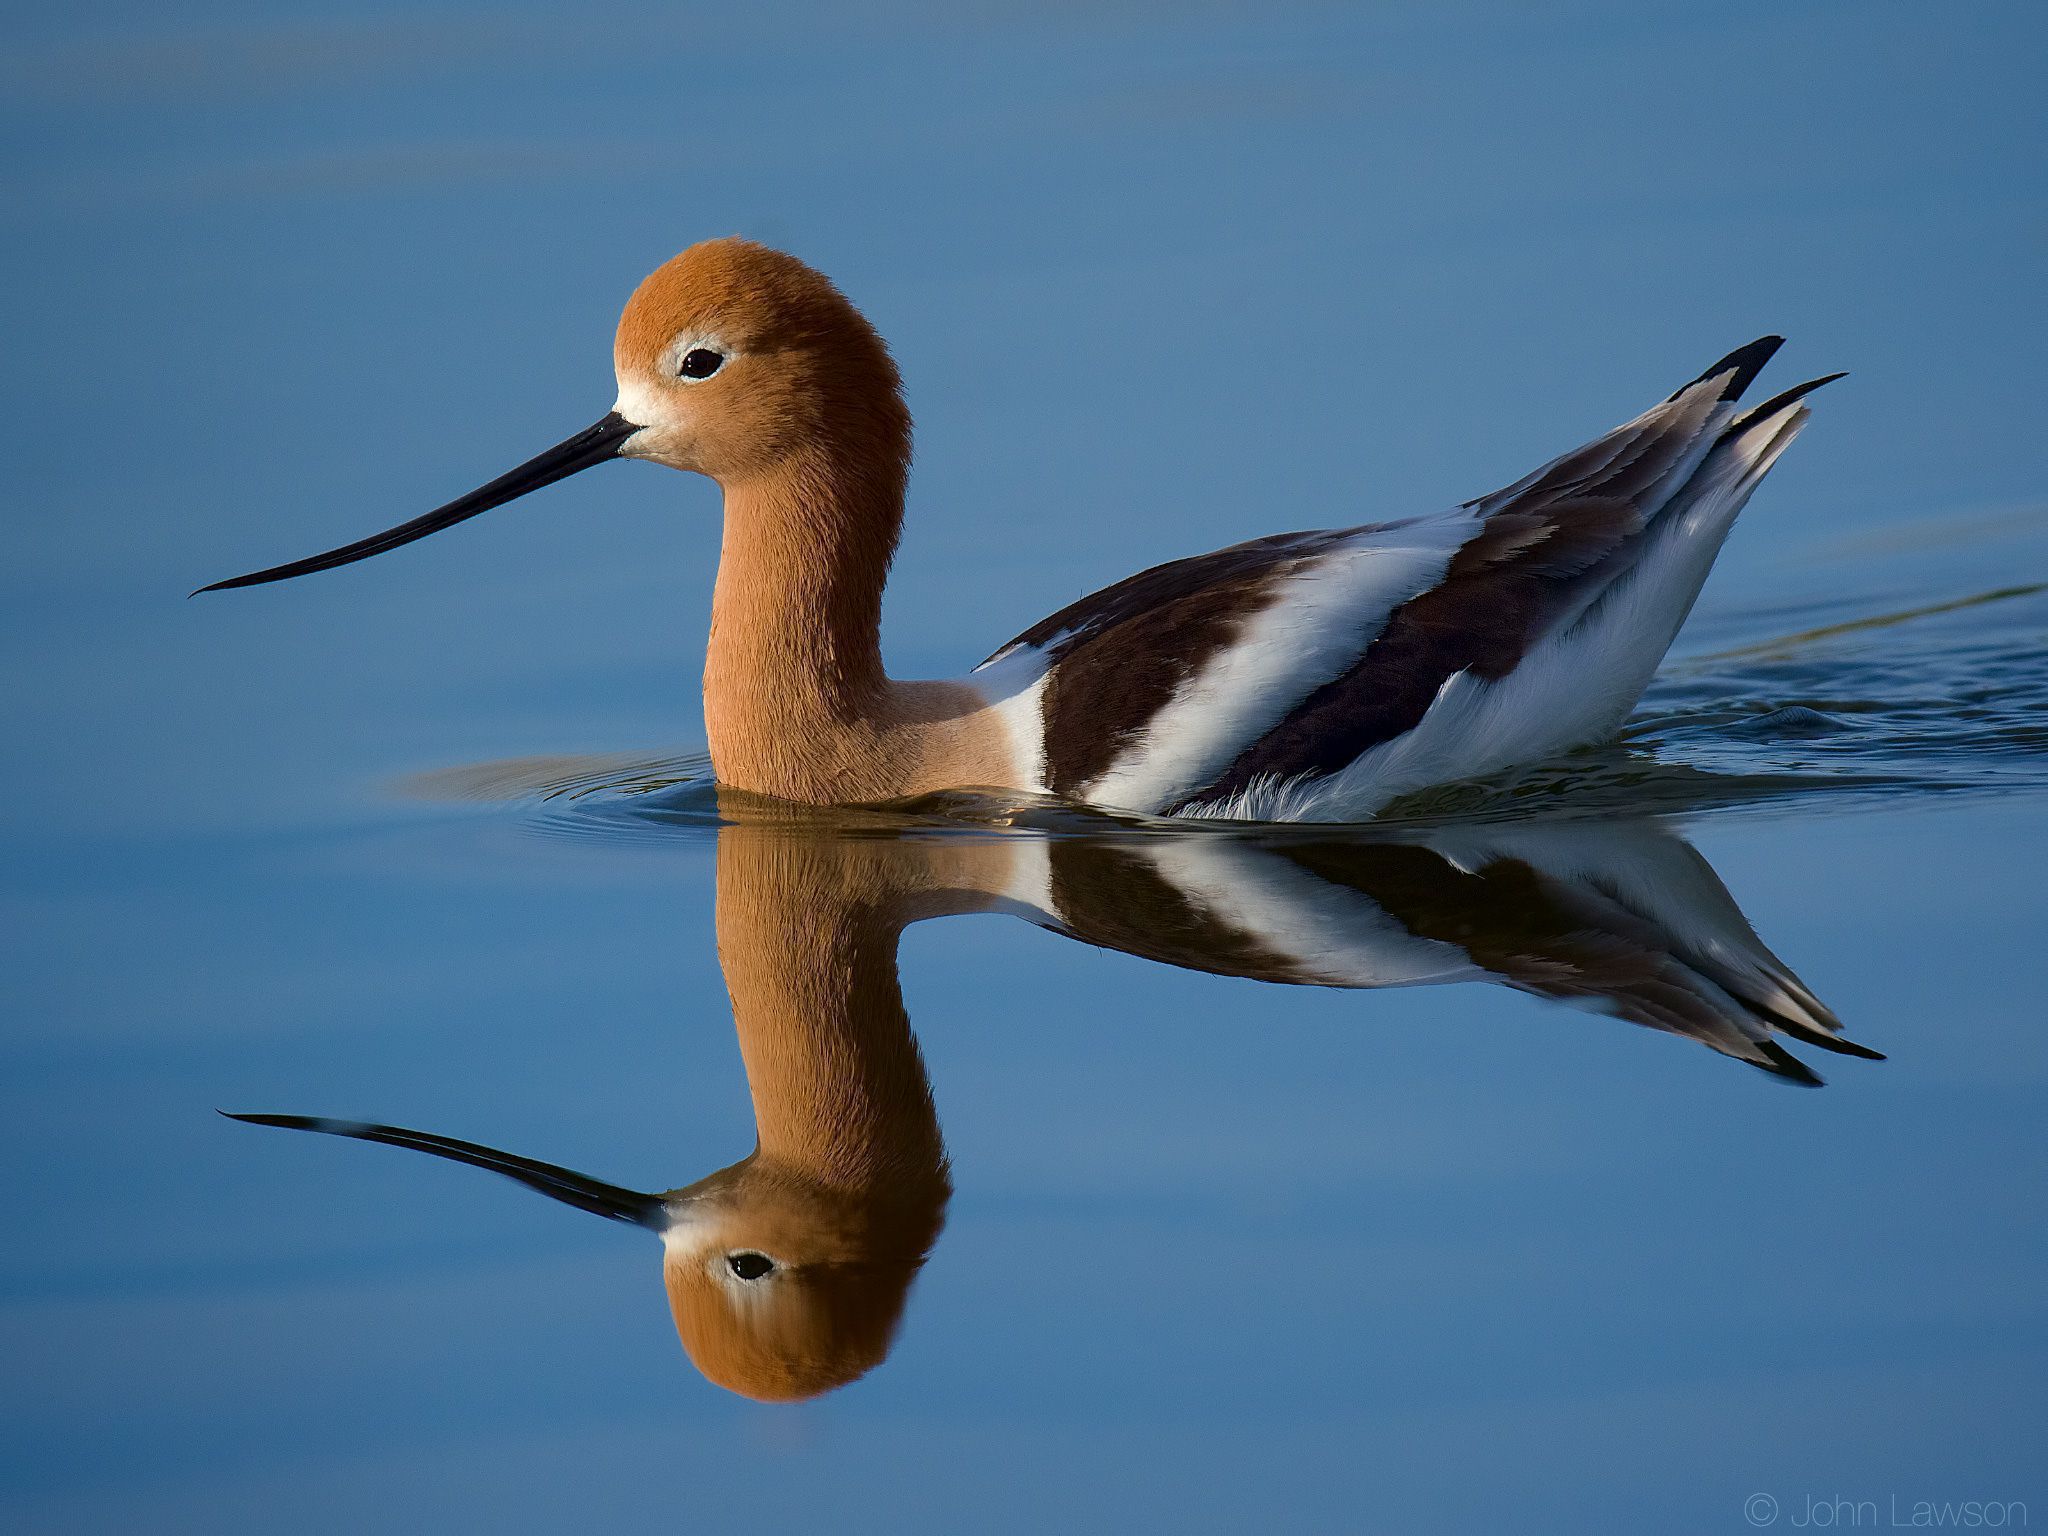 American Avocet Reflected in the Water by John Lawson